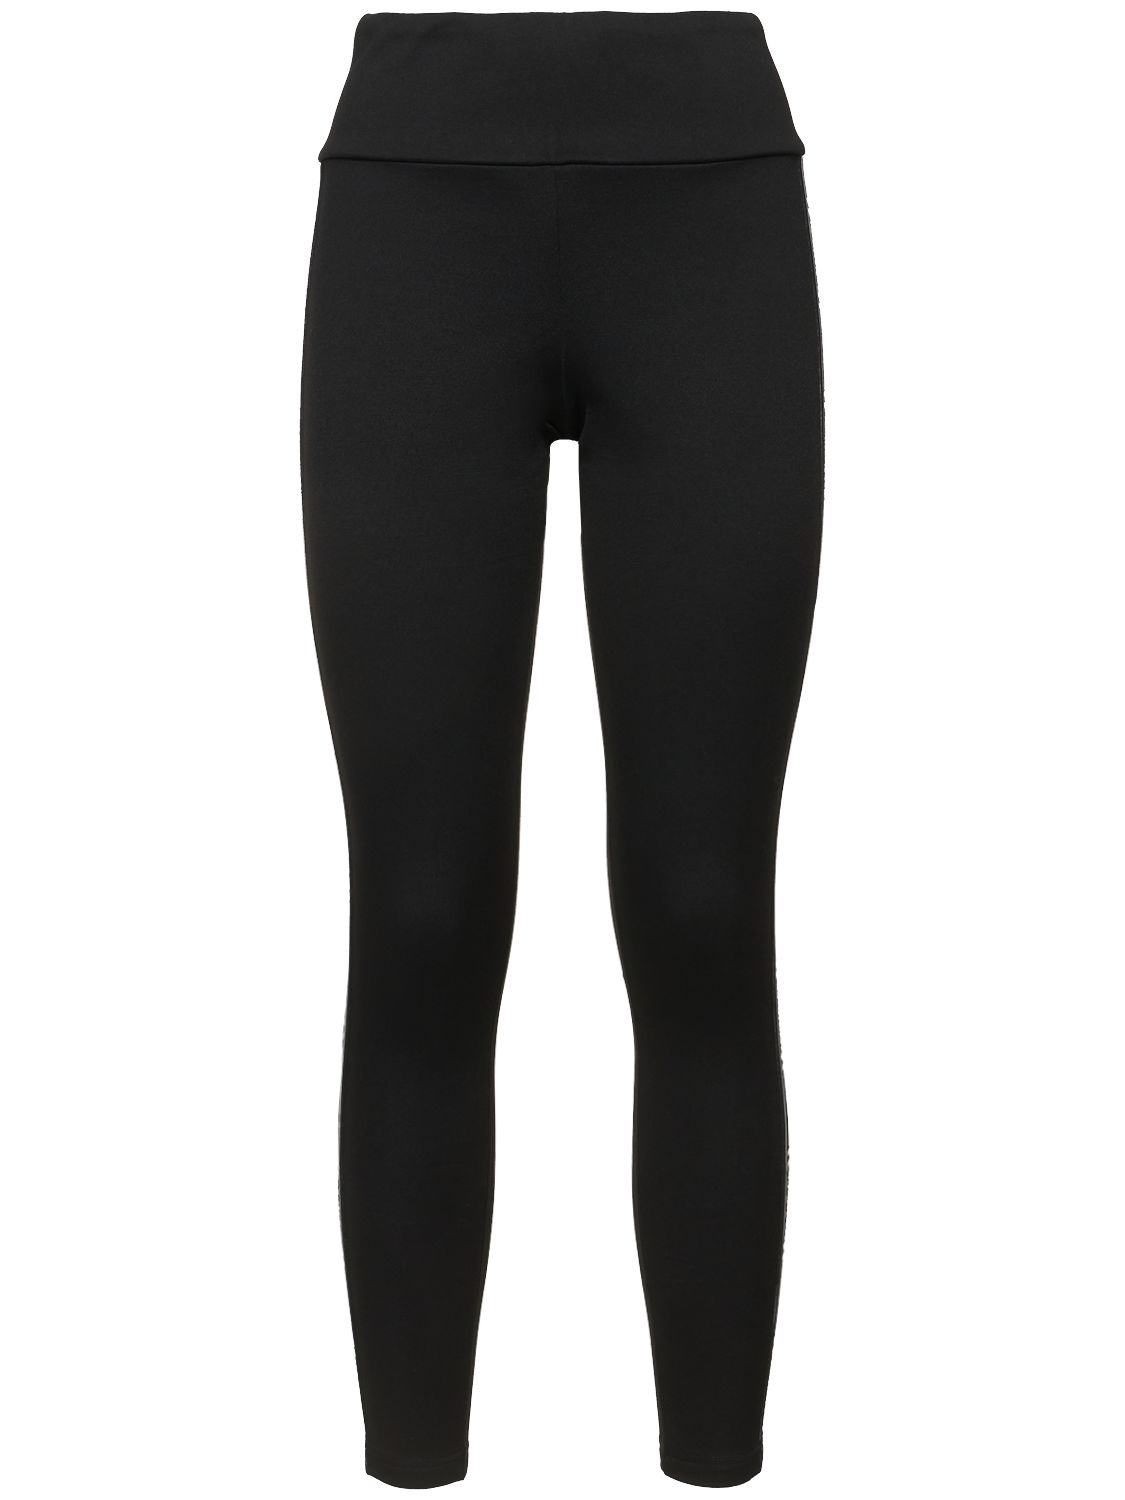 Image of Thermal Stretch Tech Leggings